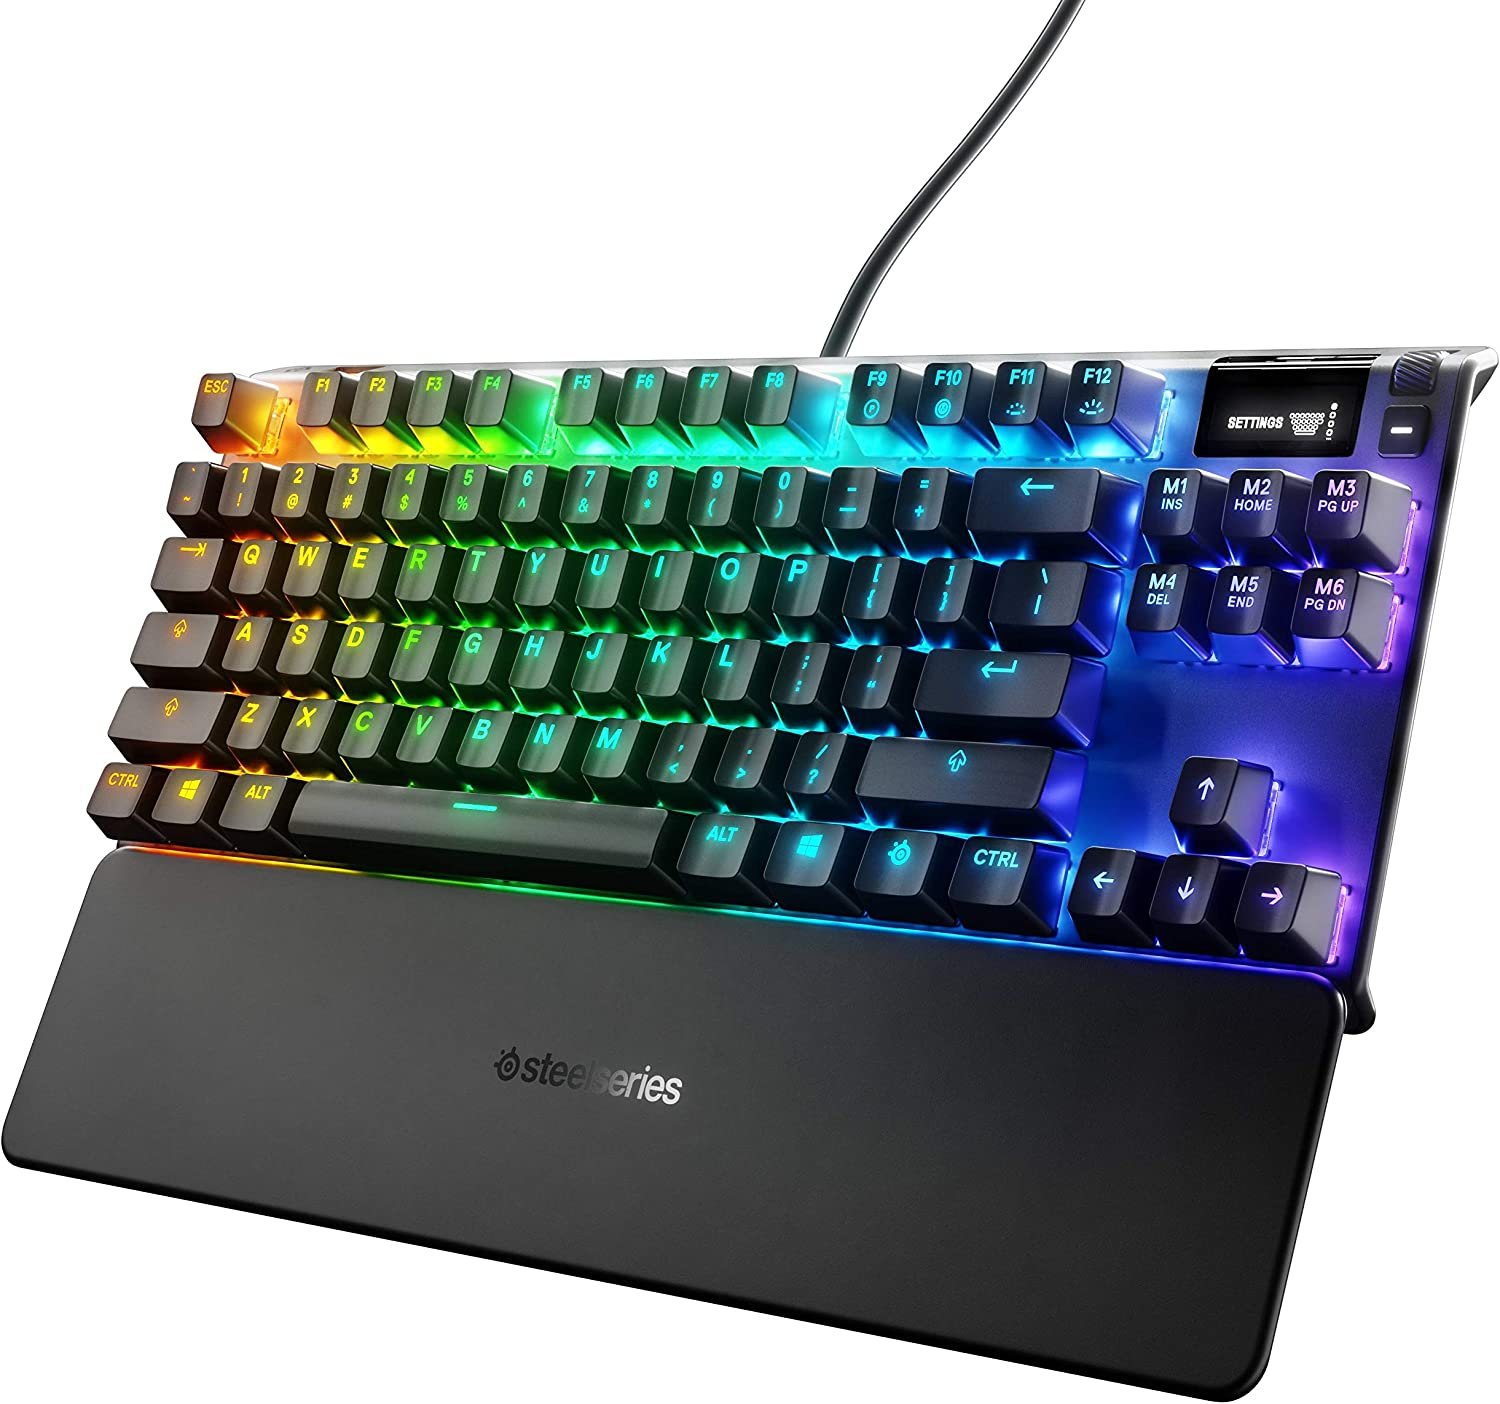 This $99 SteelSeries mechanical keyboard is compact and gentle-weight